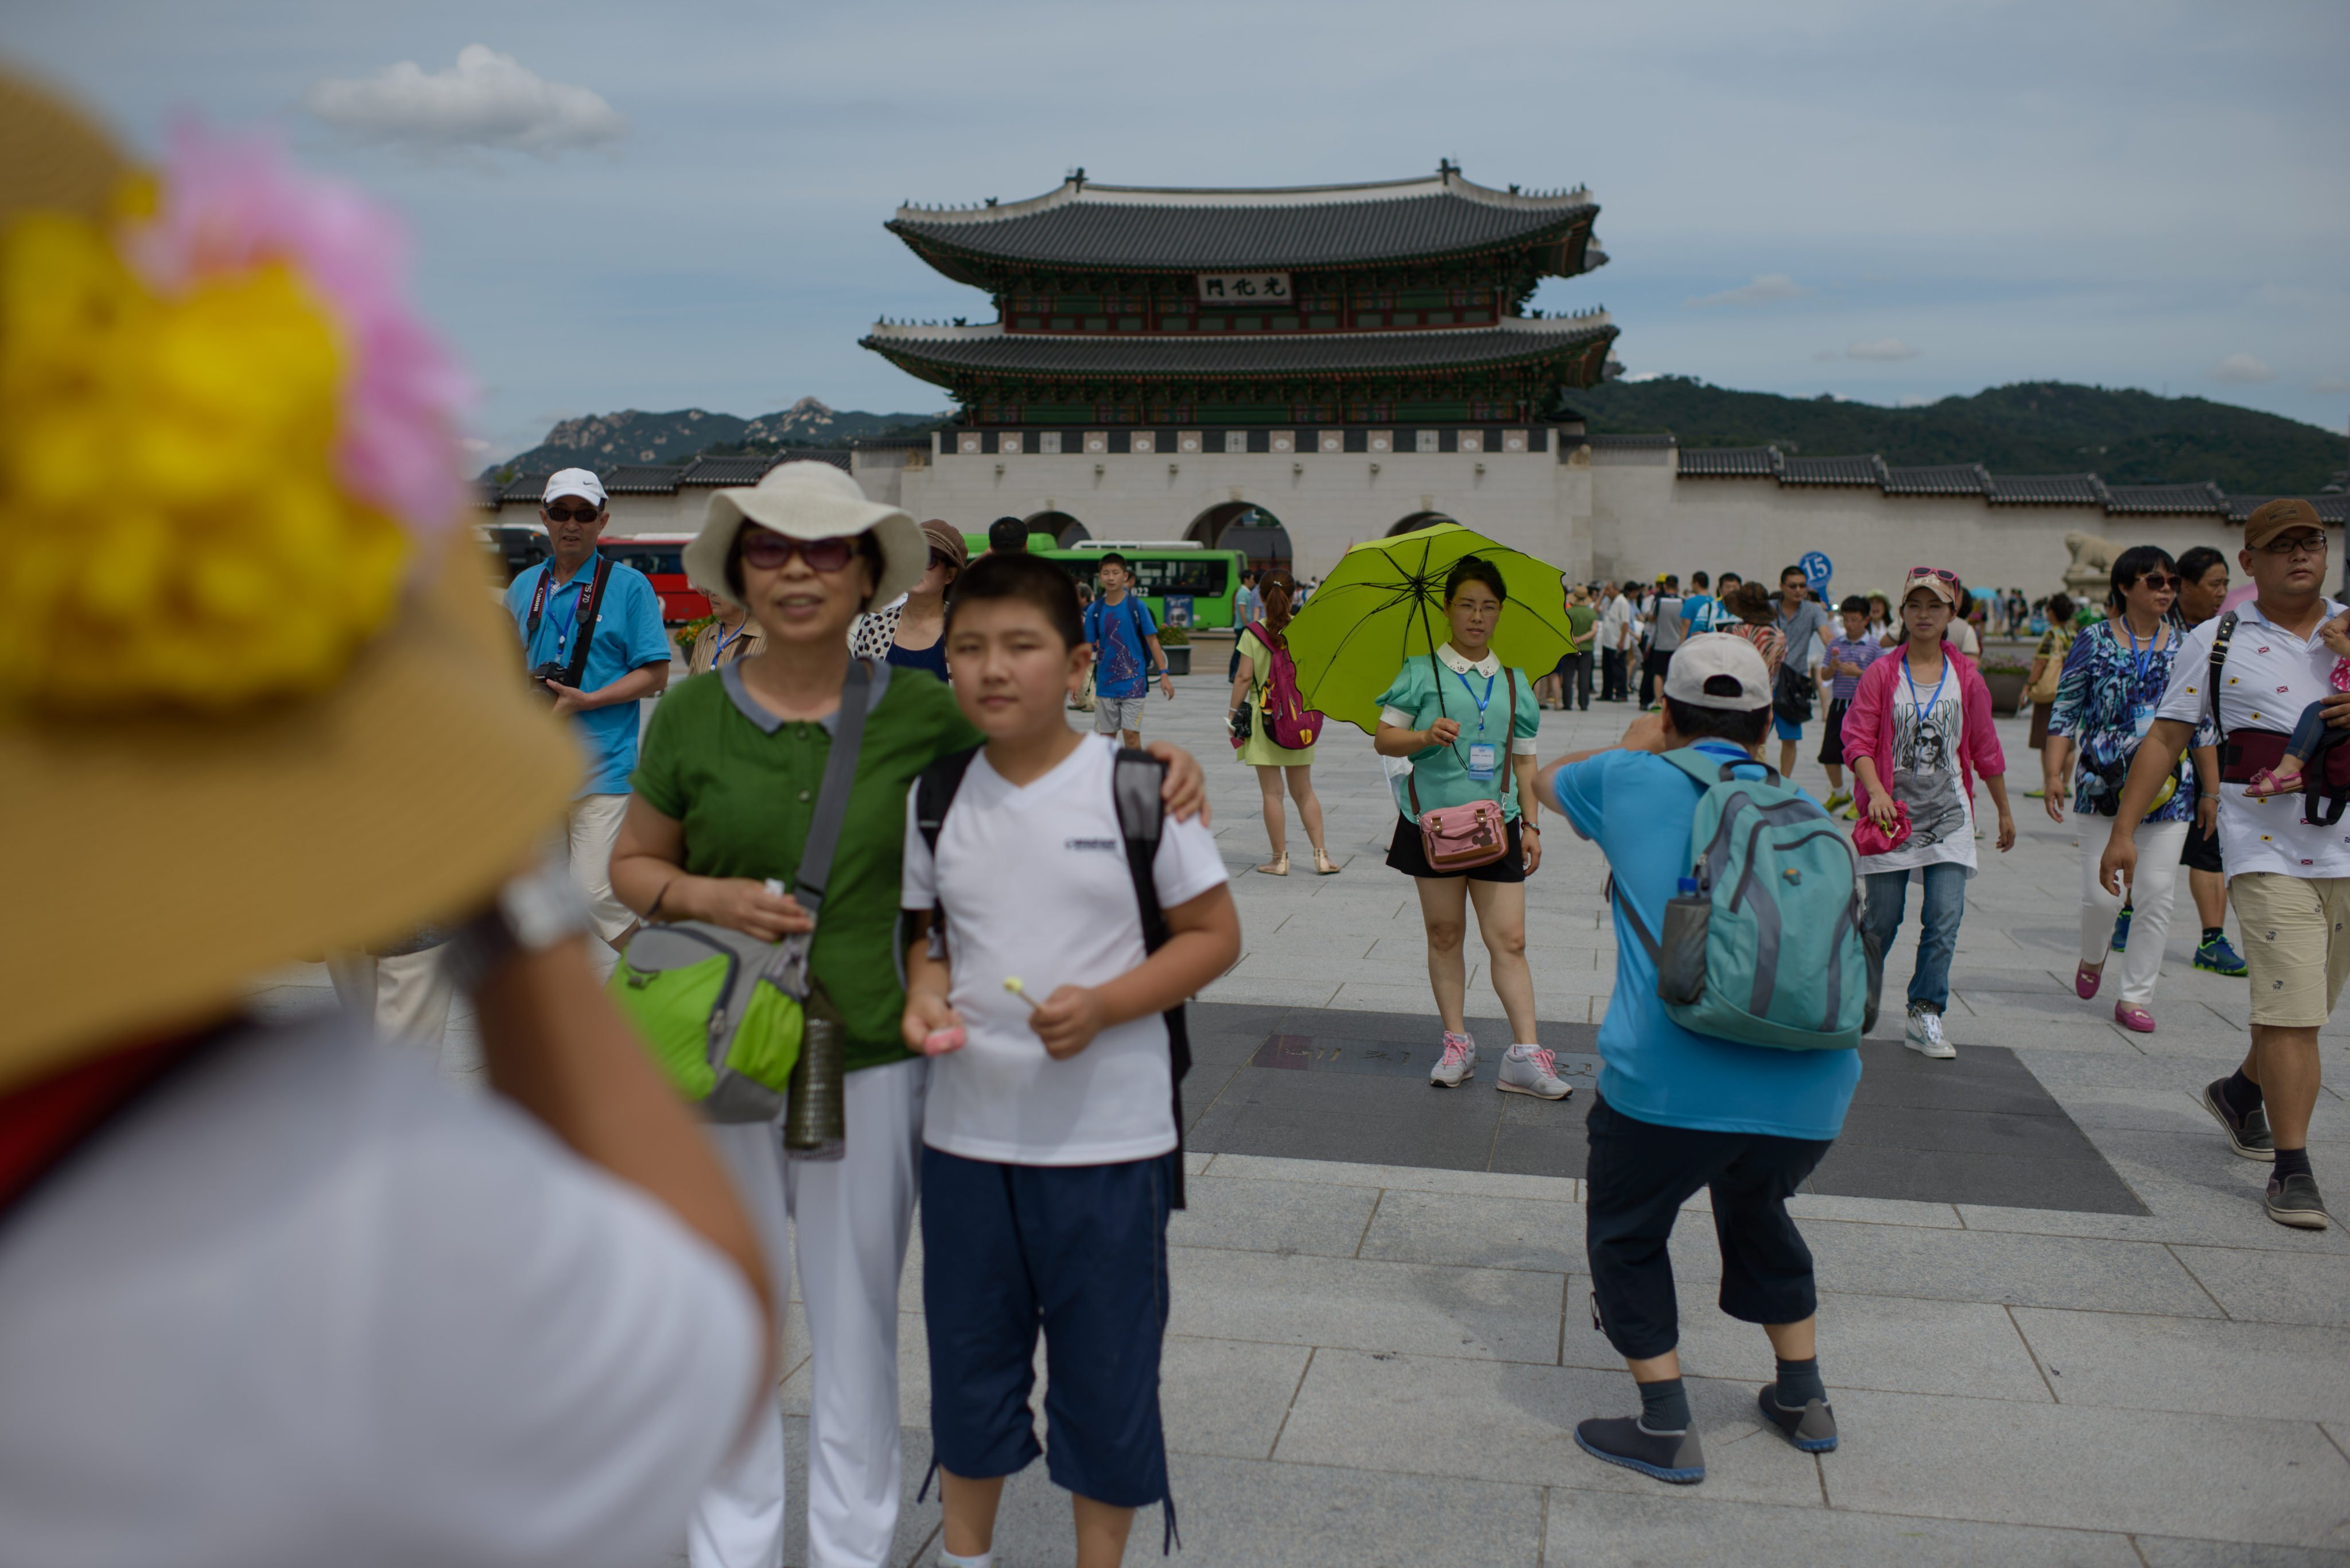 Tourists pose for photos at Gyeongbokgung Palace in Seoul in 2014. Photo: AFP